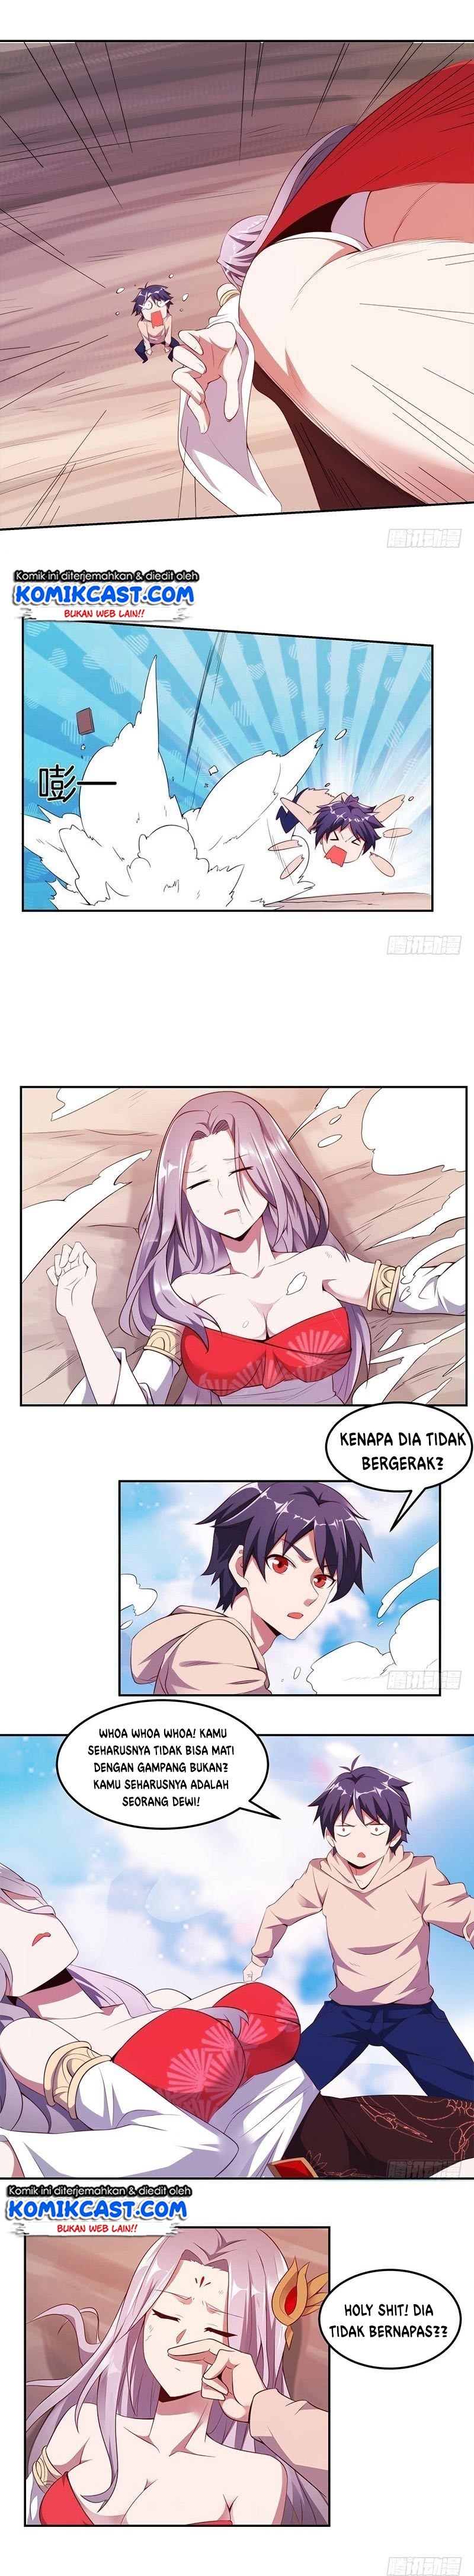 Carrying The Goddess Along Chapter 13 9